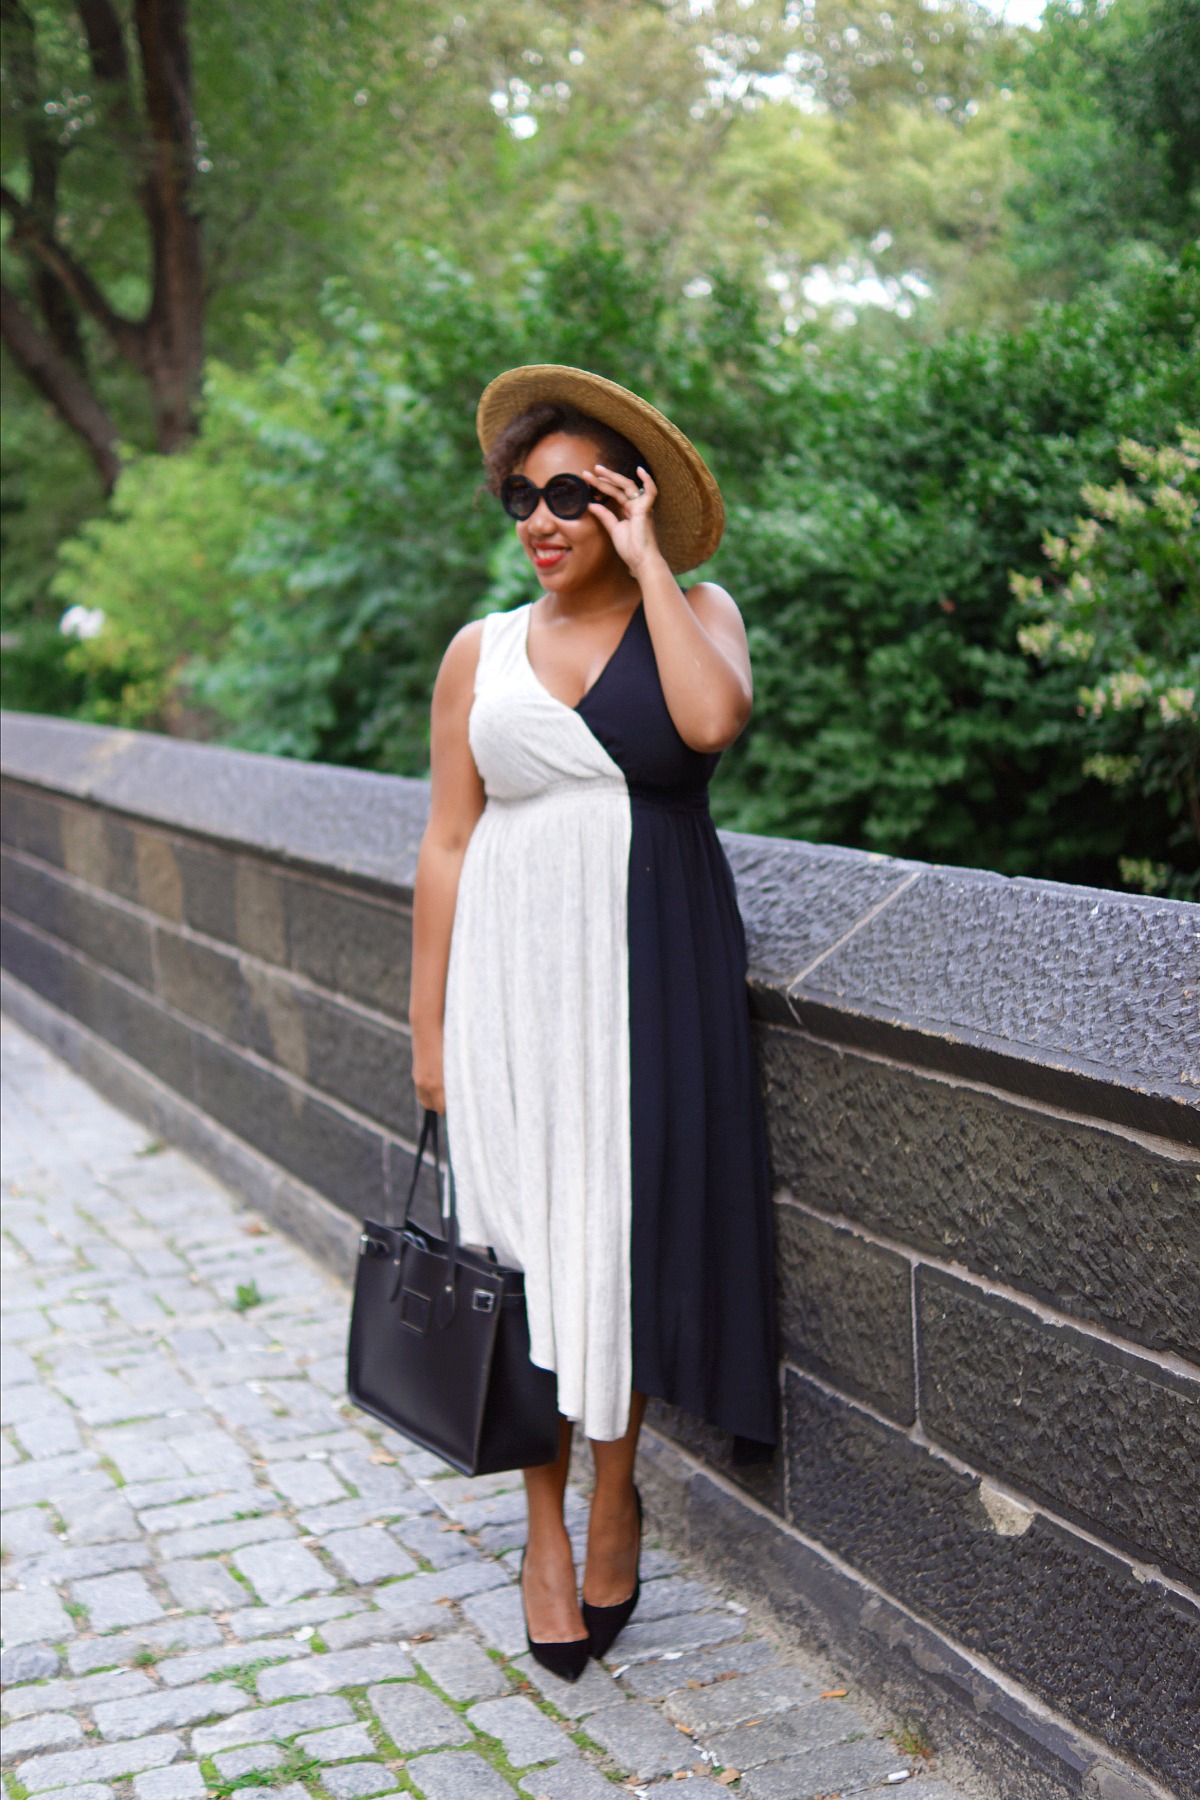 Anthropologie Dress, Fall Transitional Pieces, NYC Fashion Blogger, Closet Confections